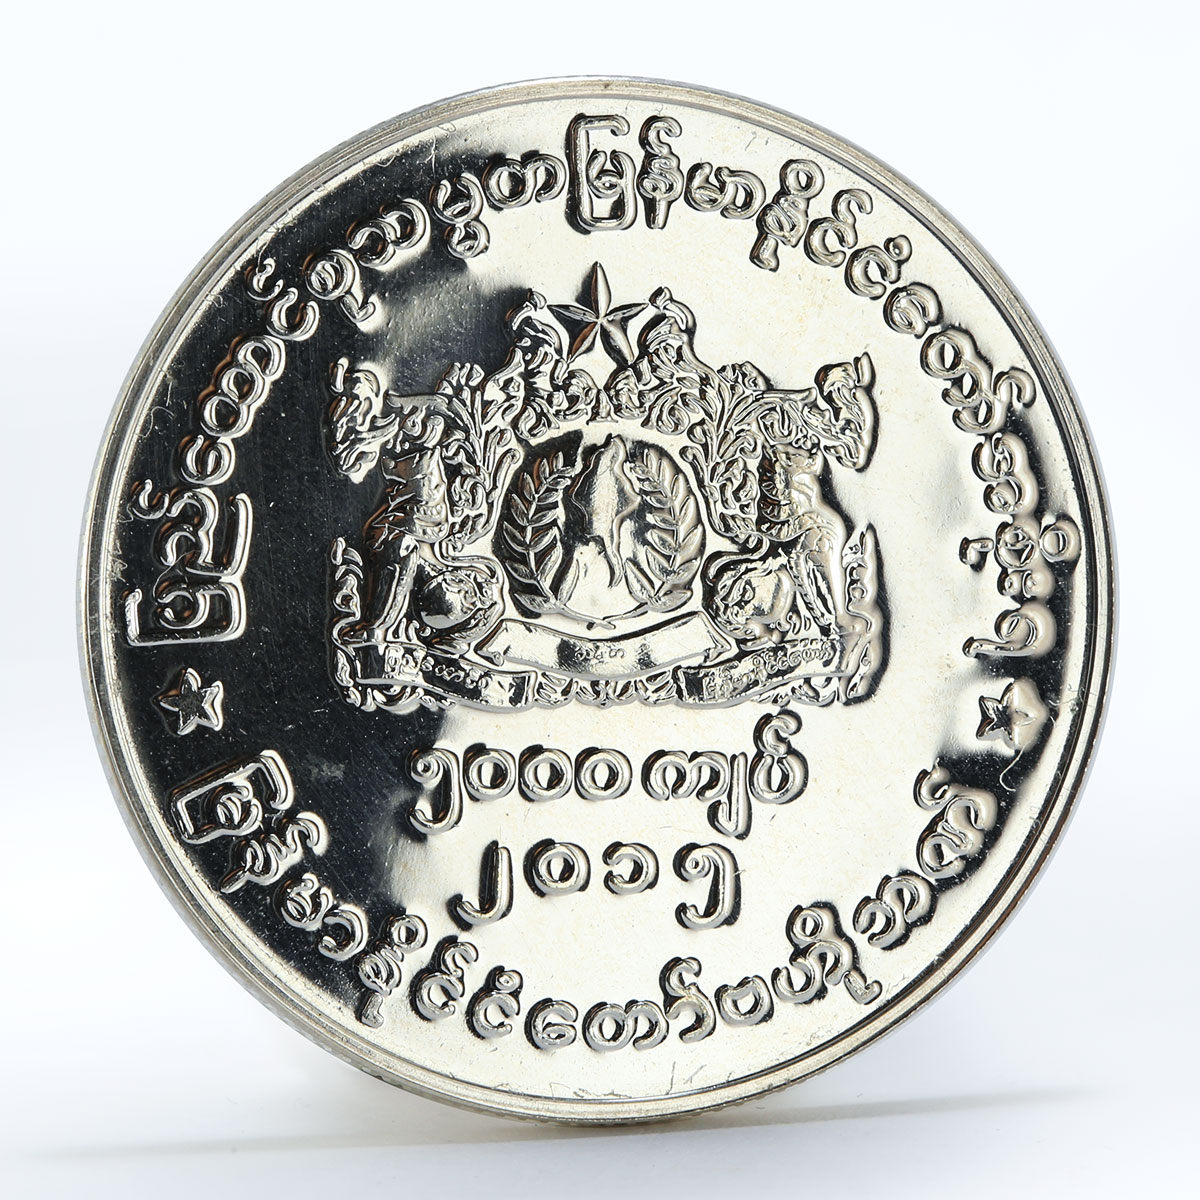 Myanmar 5000 kyats Government of Republic of Union Myanmar silver coin 2015